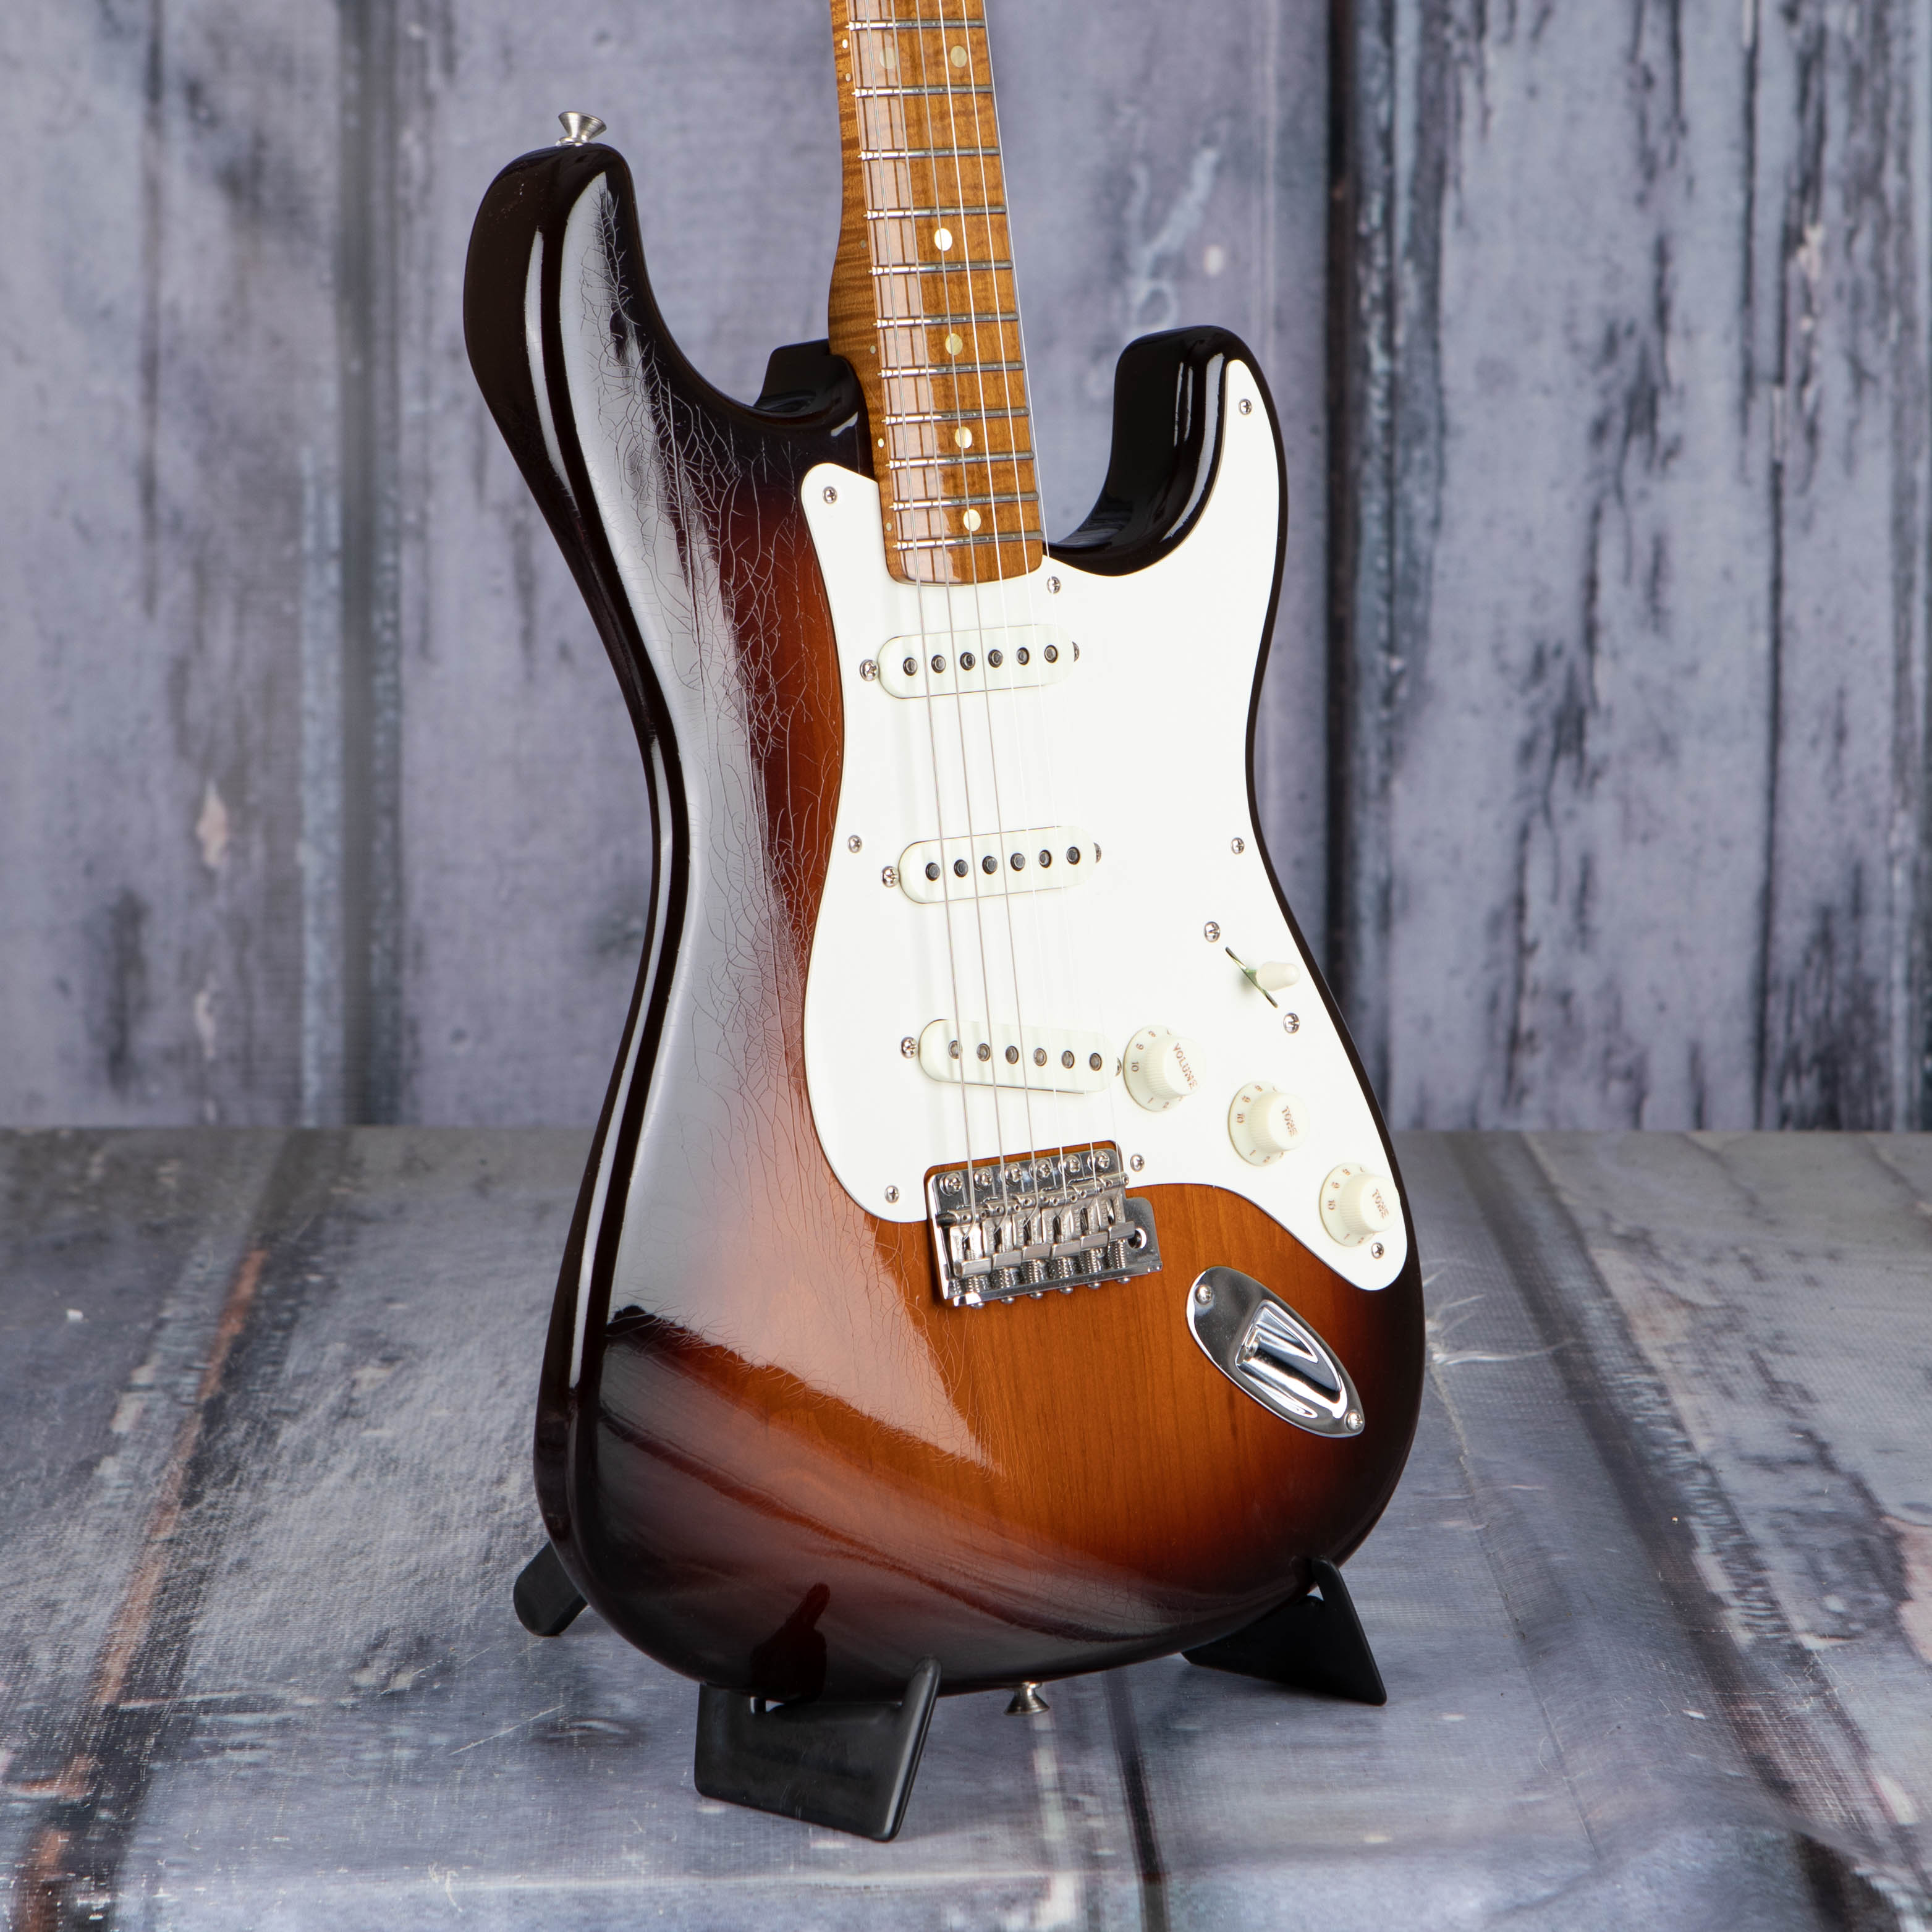 Fender Custom Shop Limited Edition Roasted Pine Stratocaster Limited Closet Classic Electric Guitar, Wide Fade Chocolate 3-Color Sunburst, angle